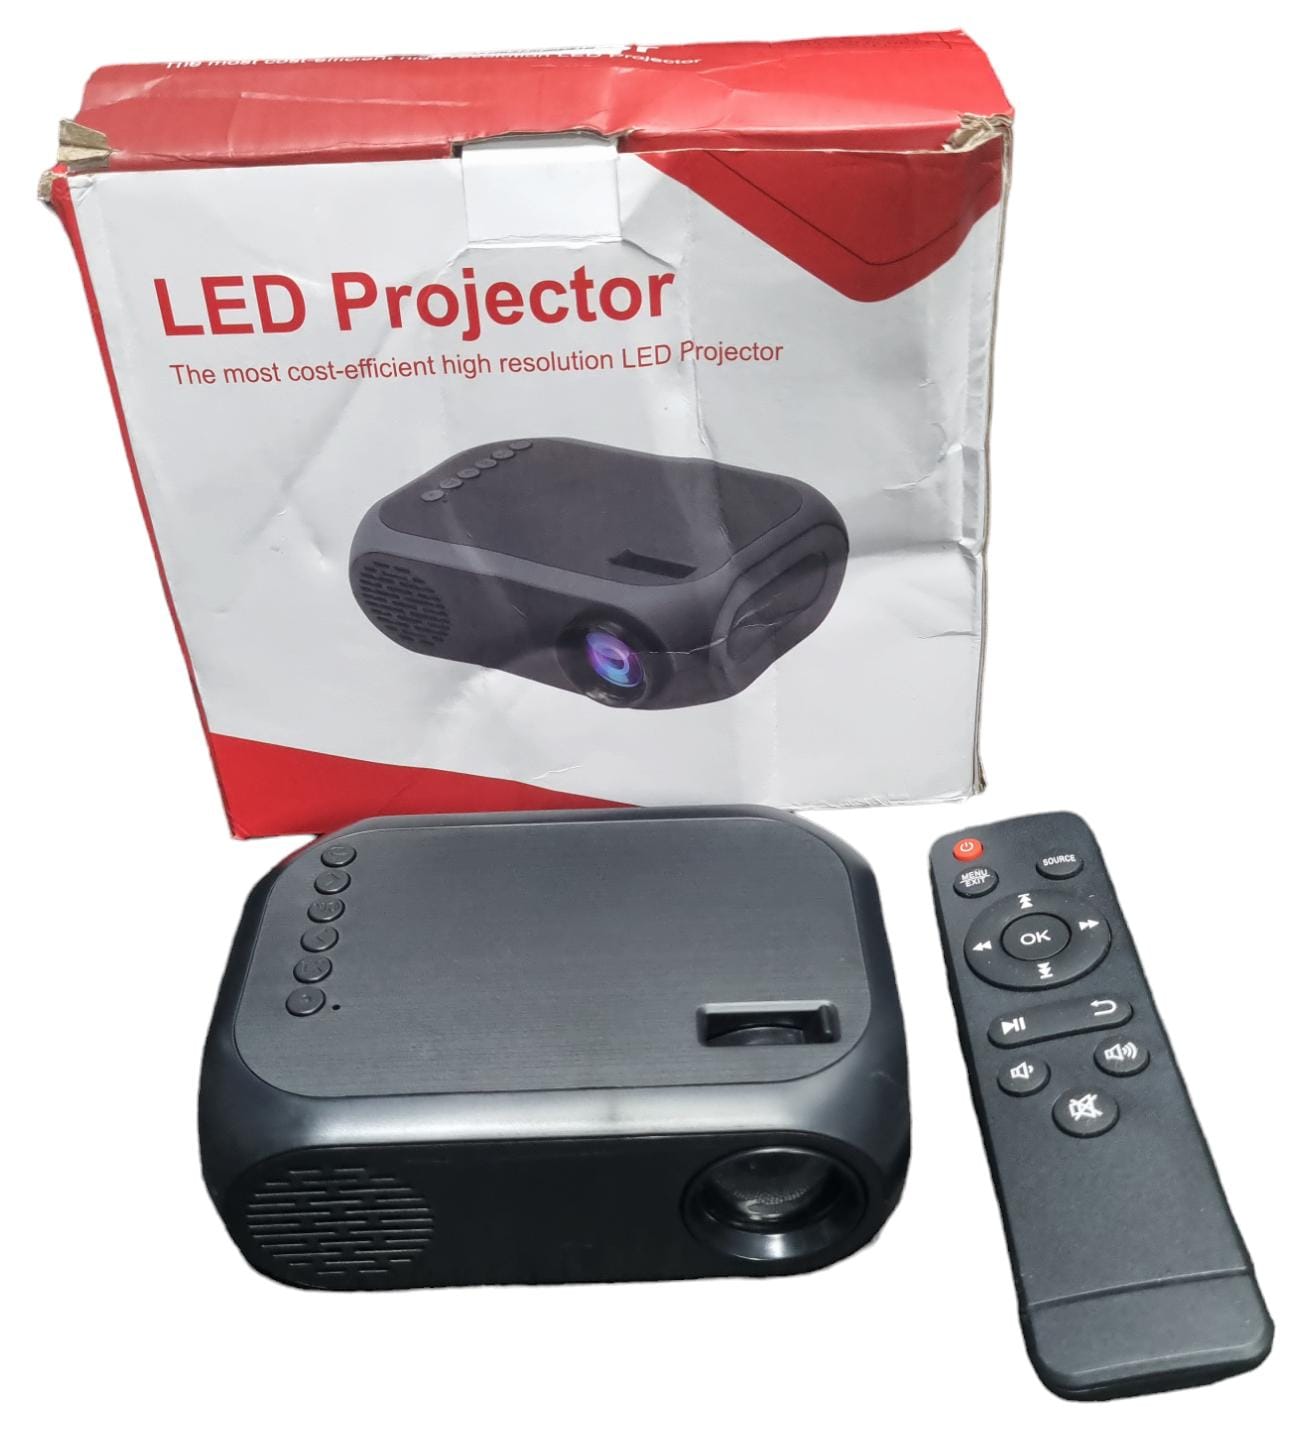 LED Projector - BLJ-111 - Black - Boxed With Remote